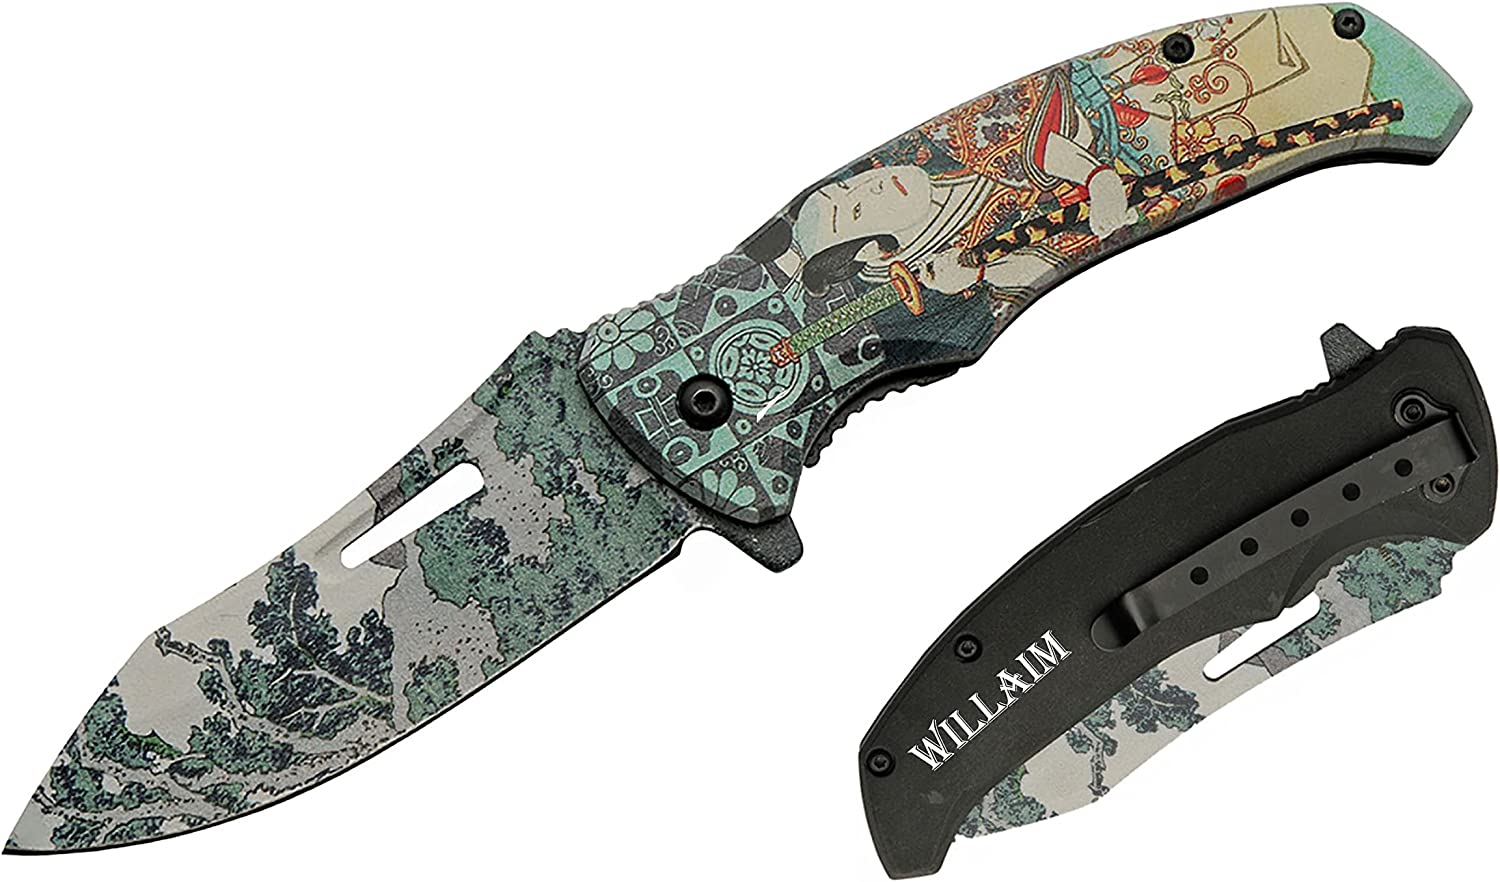 GIFTS INFINITY - Customized Engraved Pocket Folding Knife – 1 Piece (Forest Samurai)